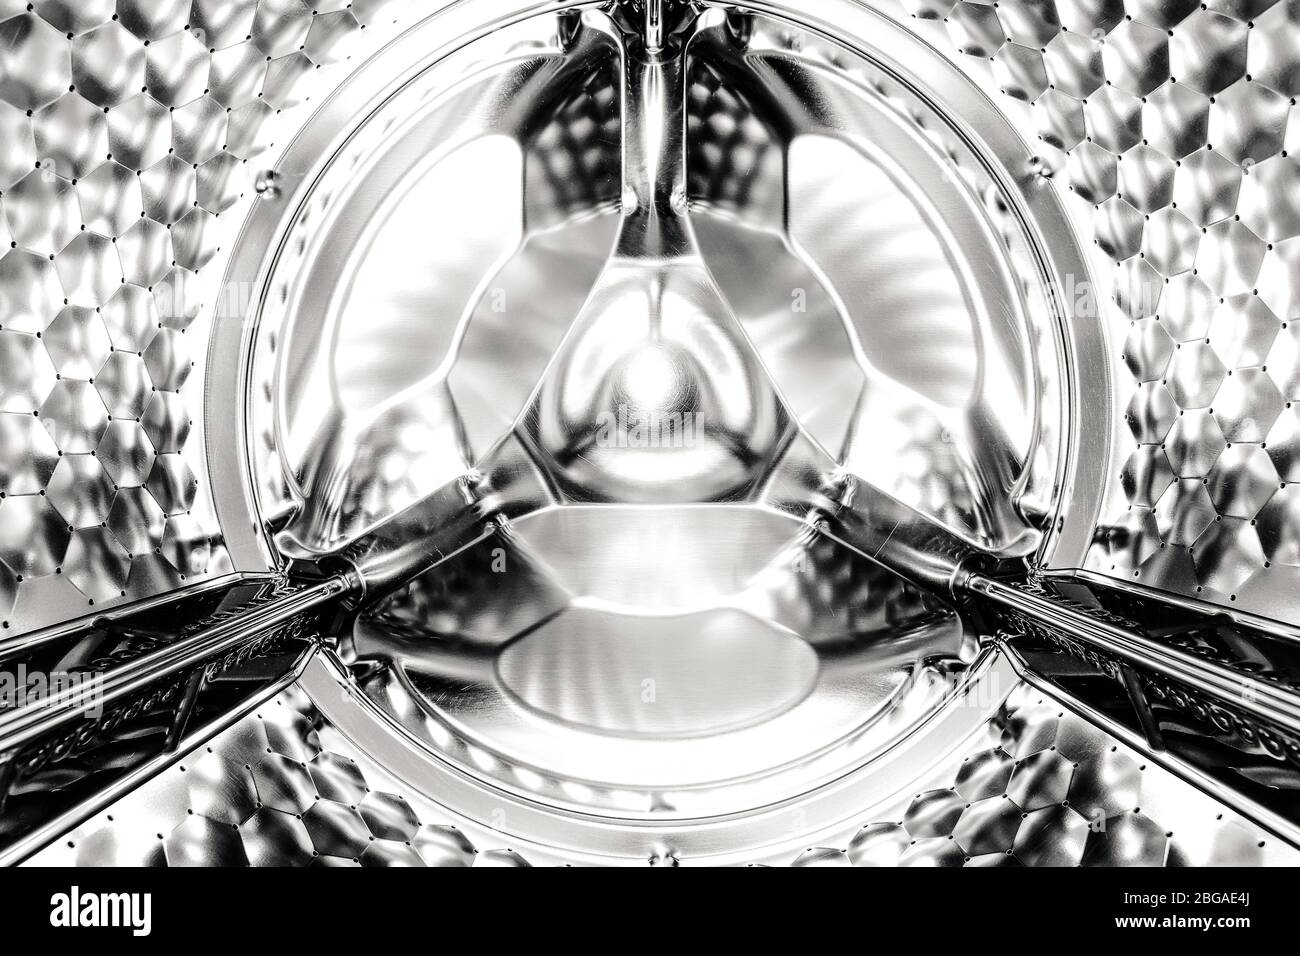 inside a washing machine abstract view Stock Photo